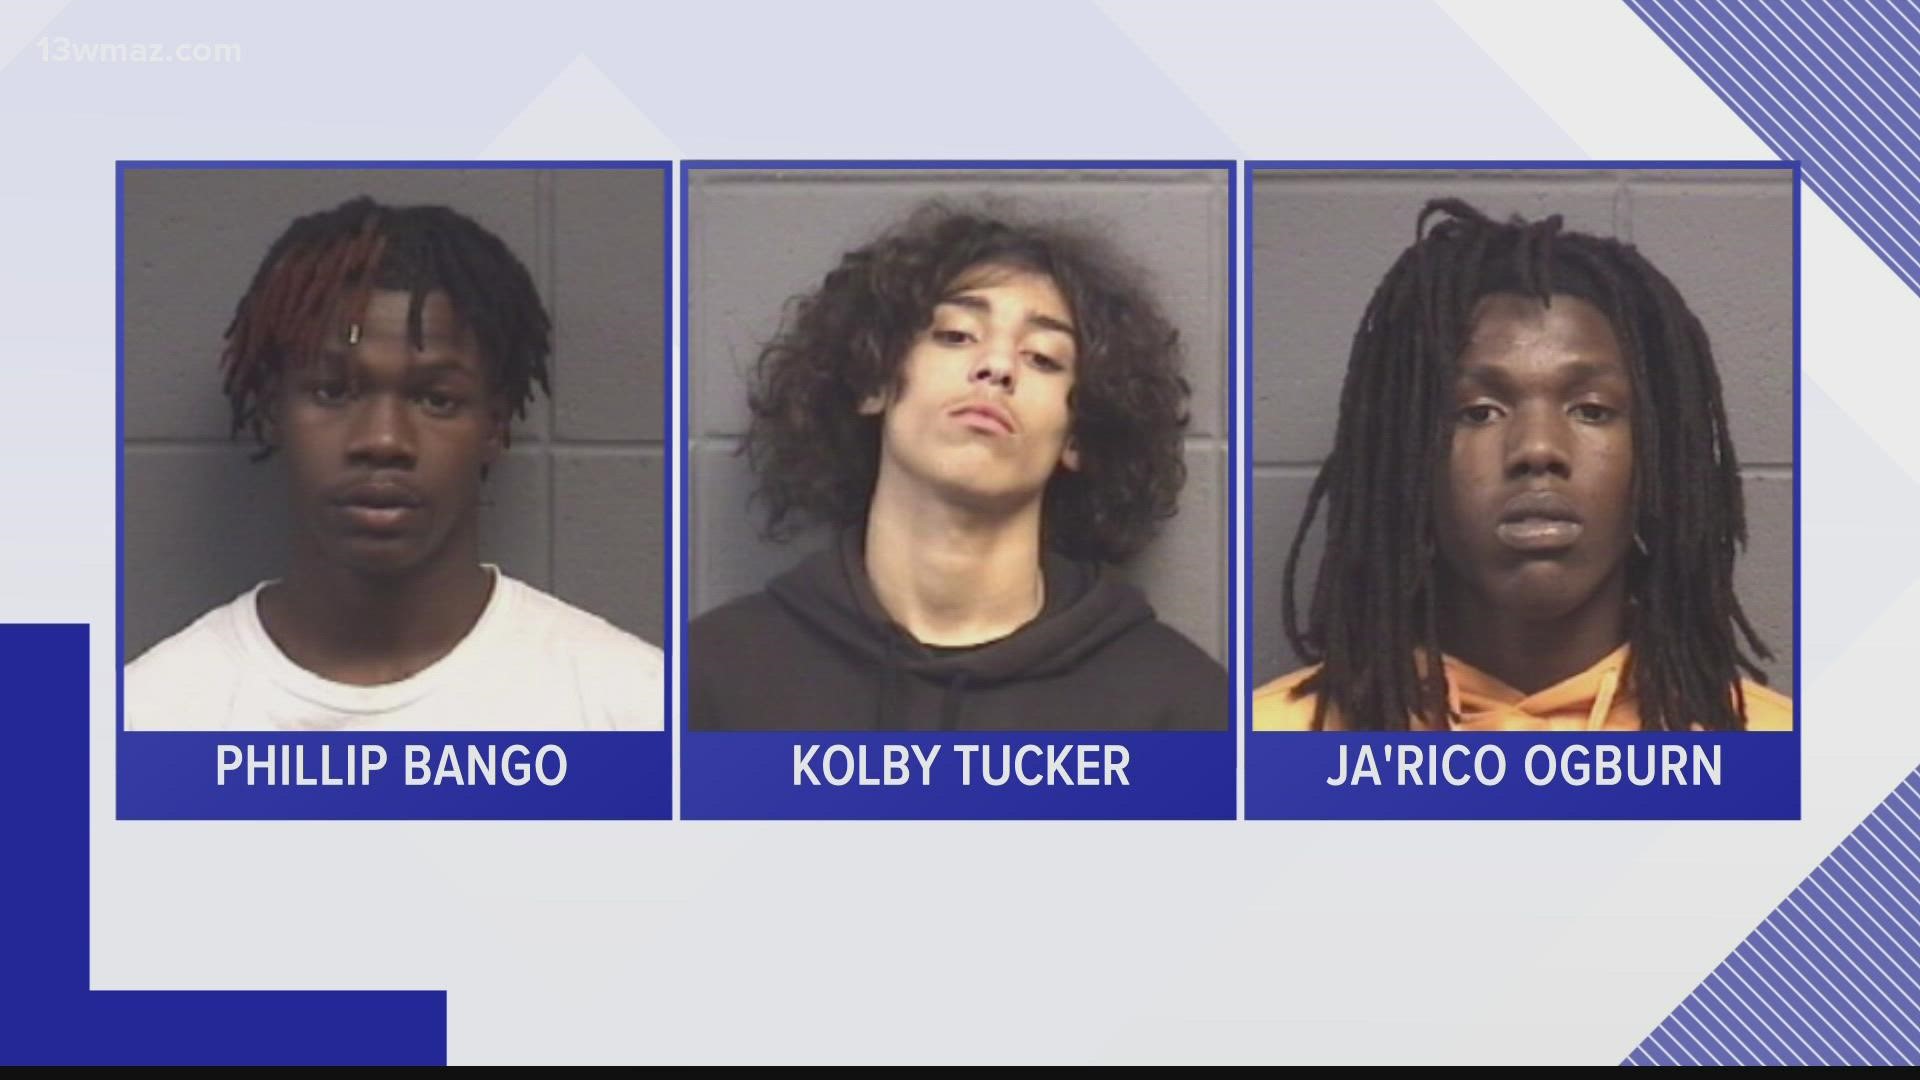 The men were identified as: 18-year-old Phillip Bango, 18-year-old Kolby Tucker and 18-year-old Ja’rico Ogburn.